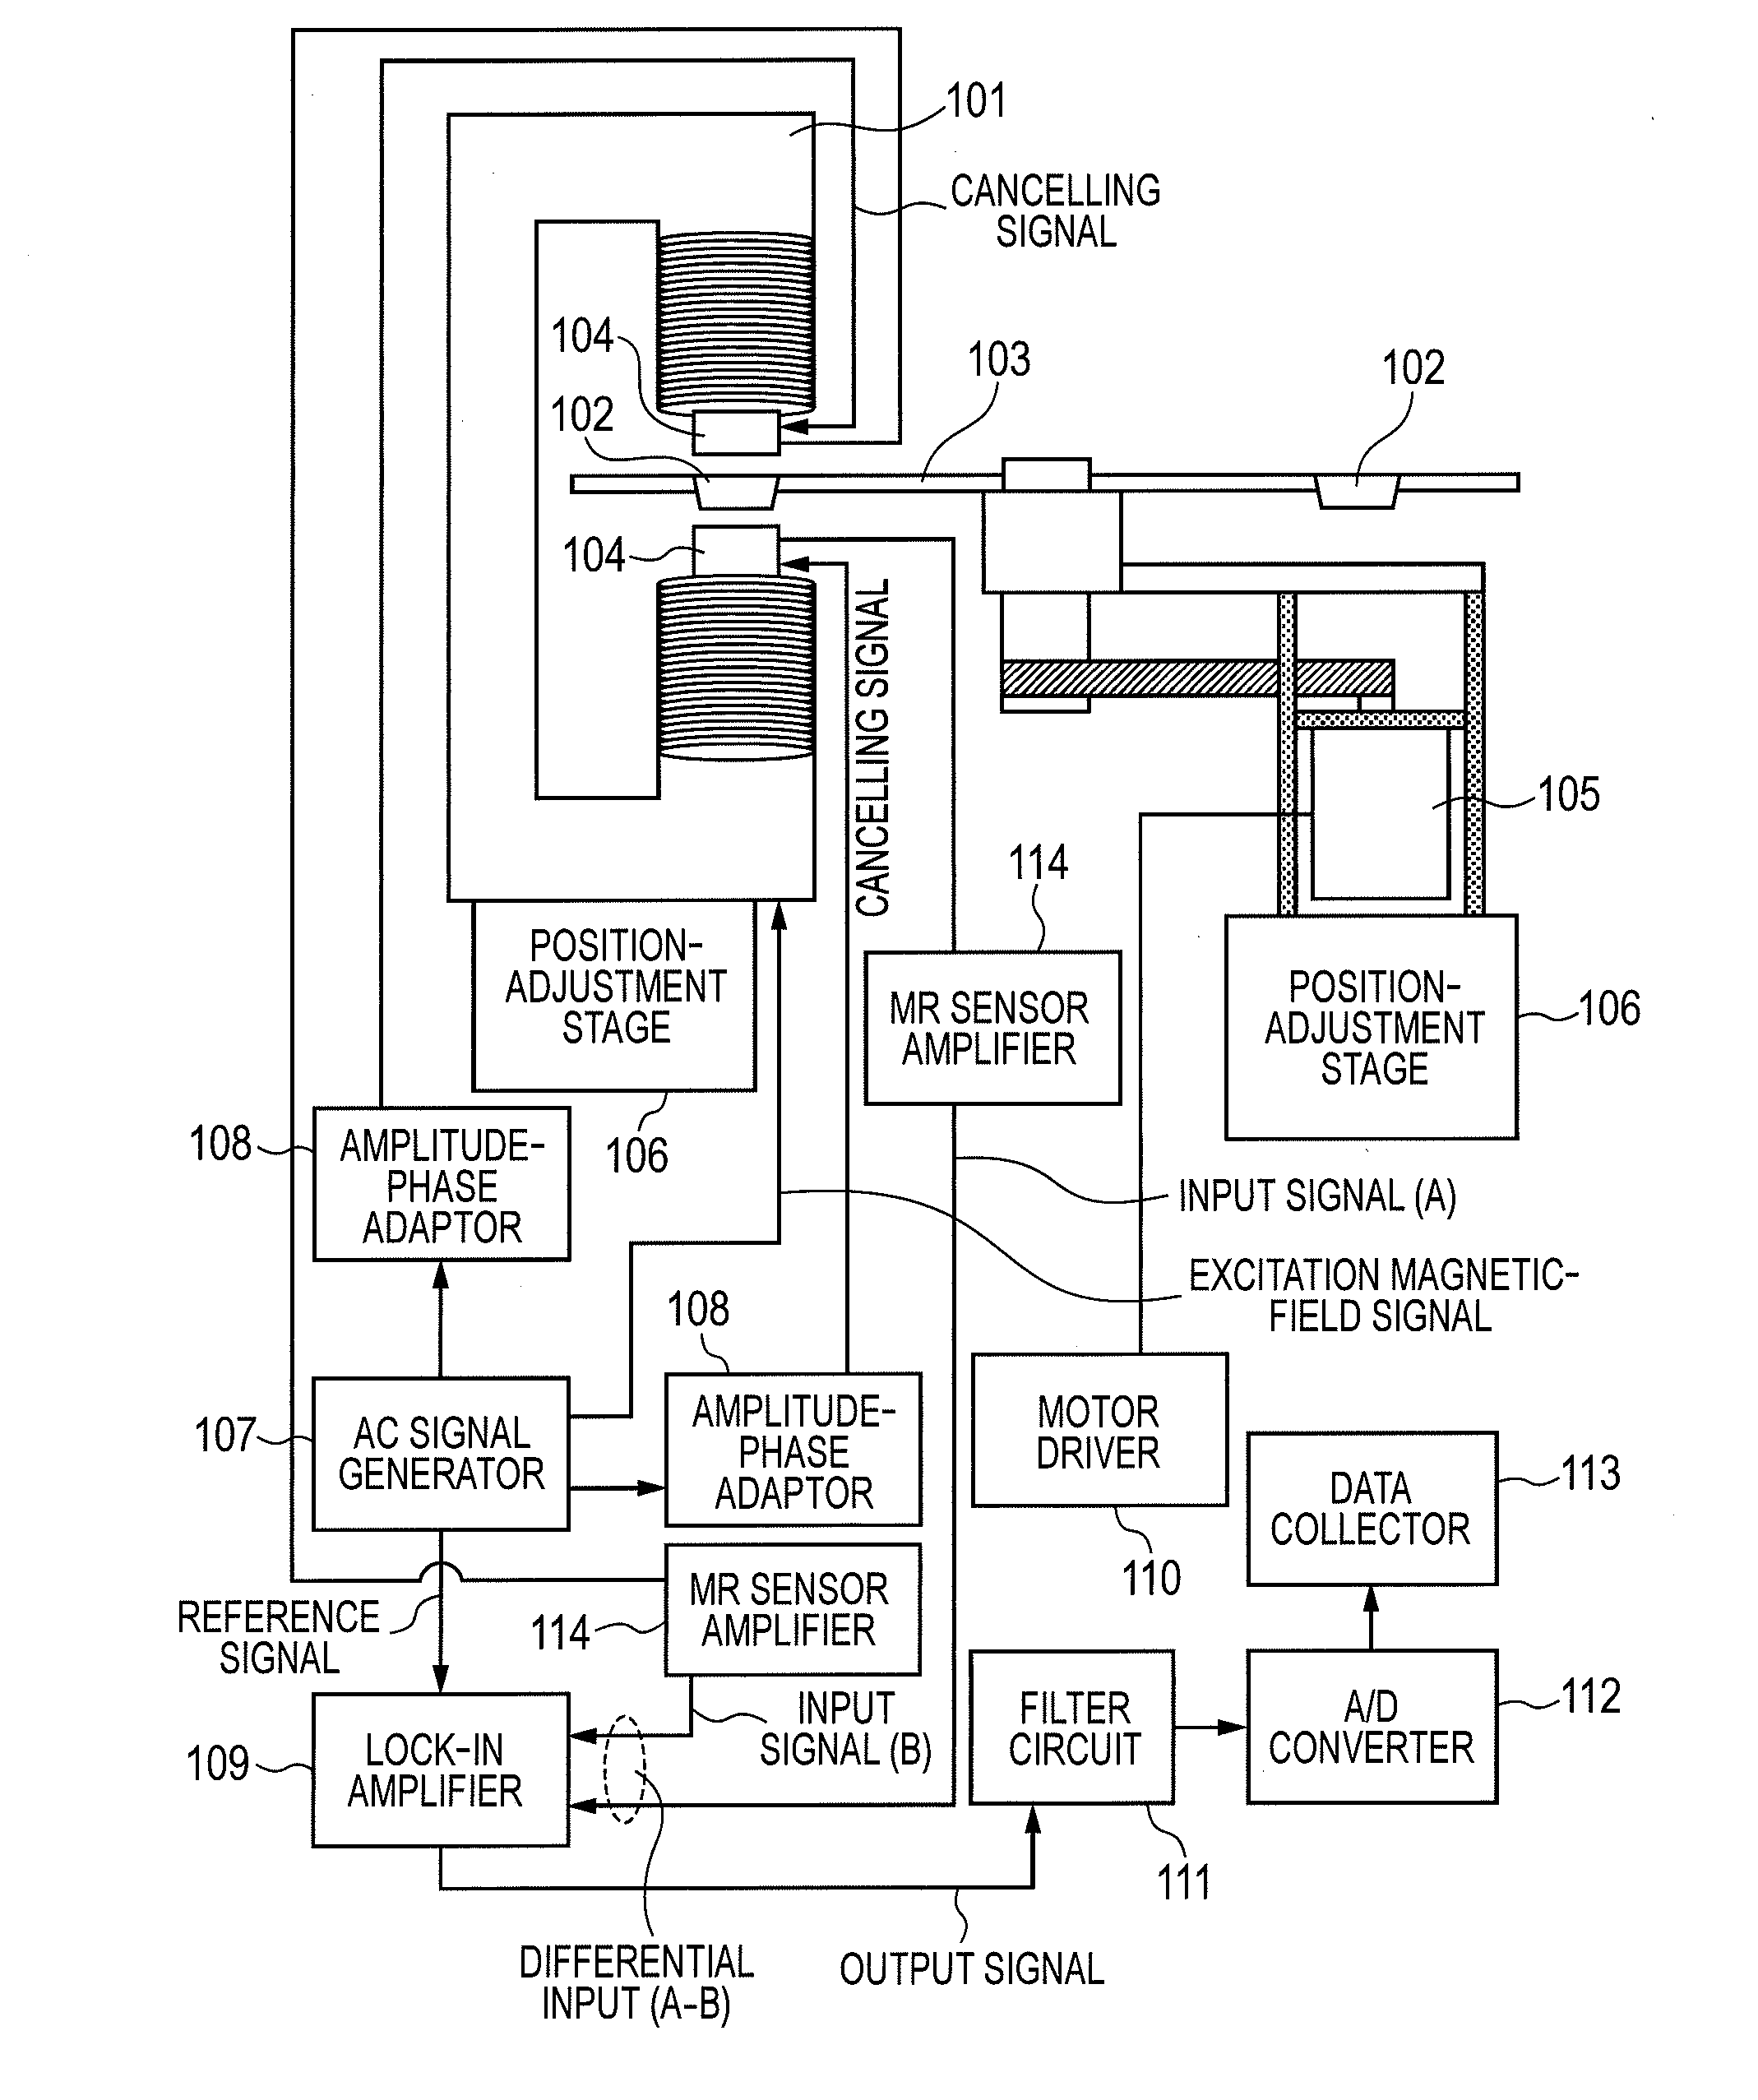 Magnetic-Field Measurement Device